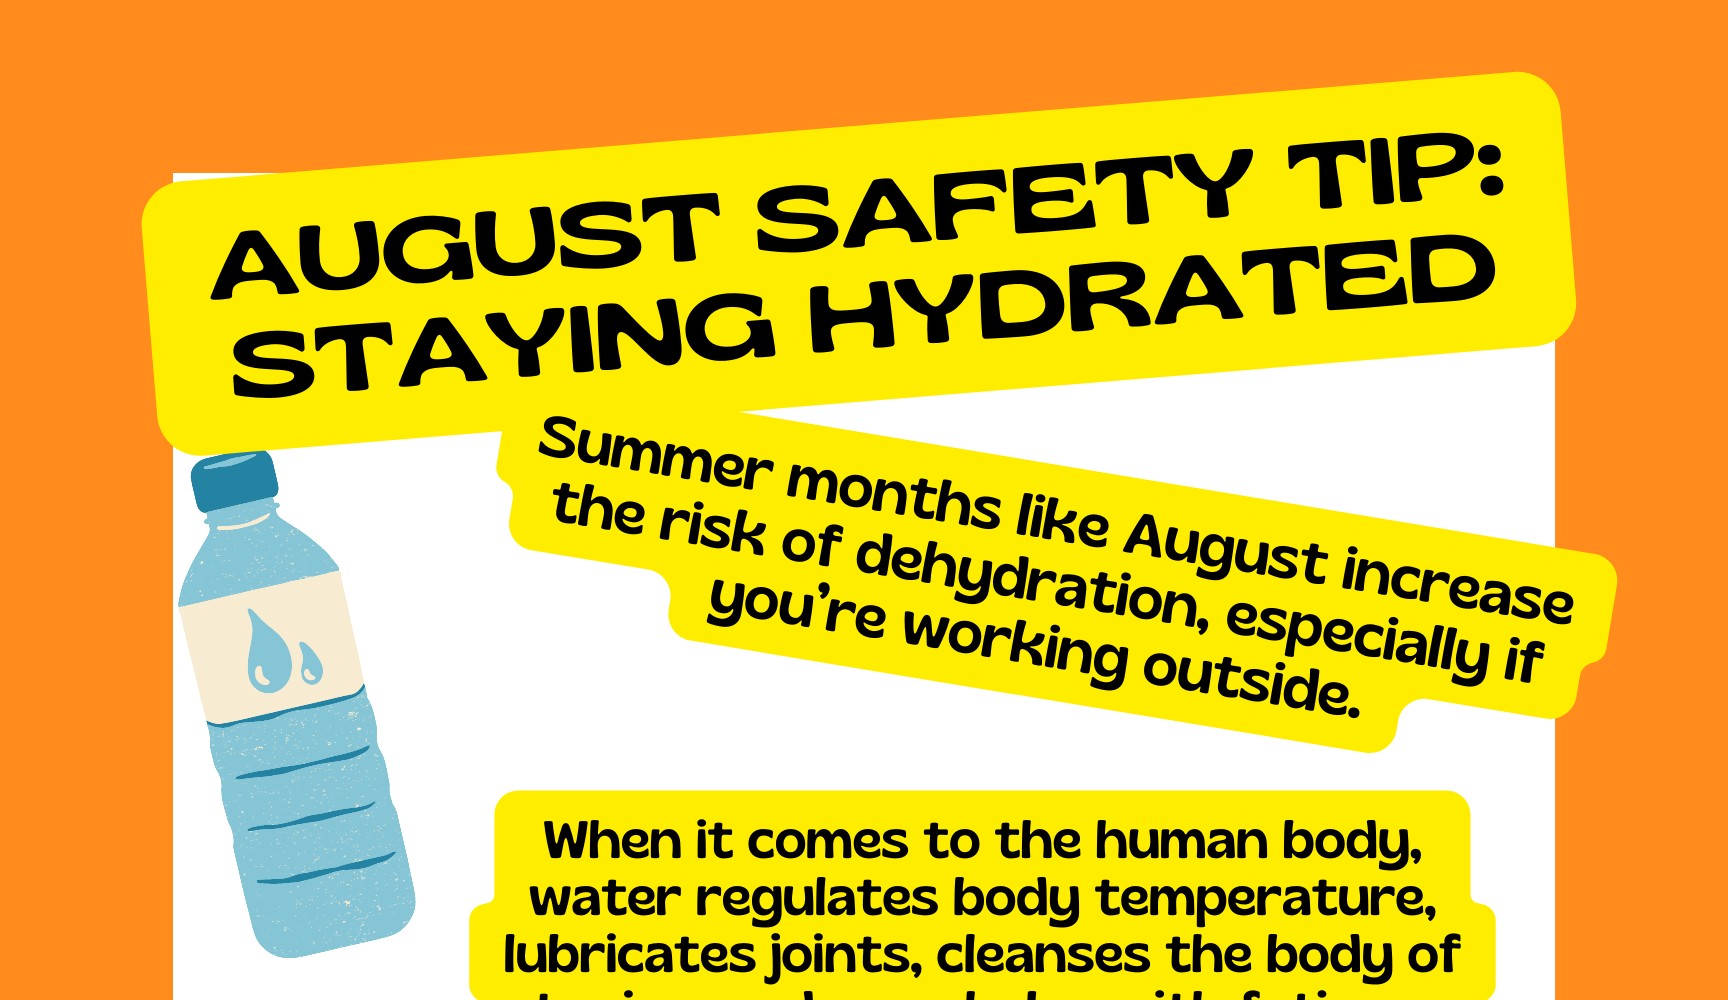 Heat Safety Tip: Stay Hydrated!